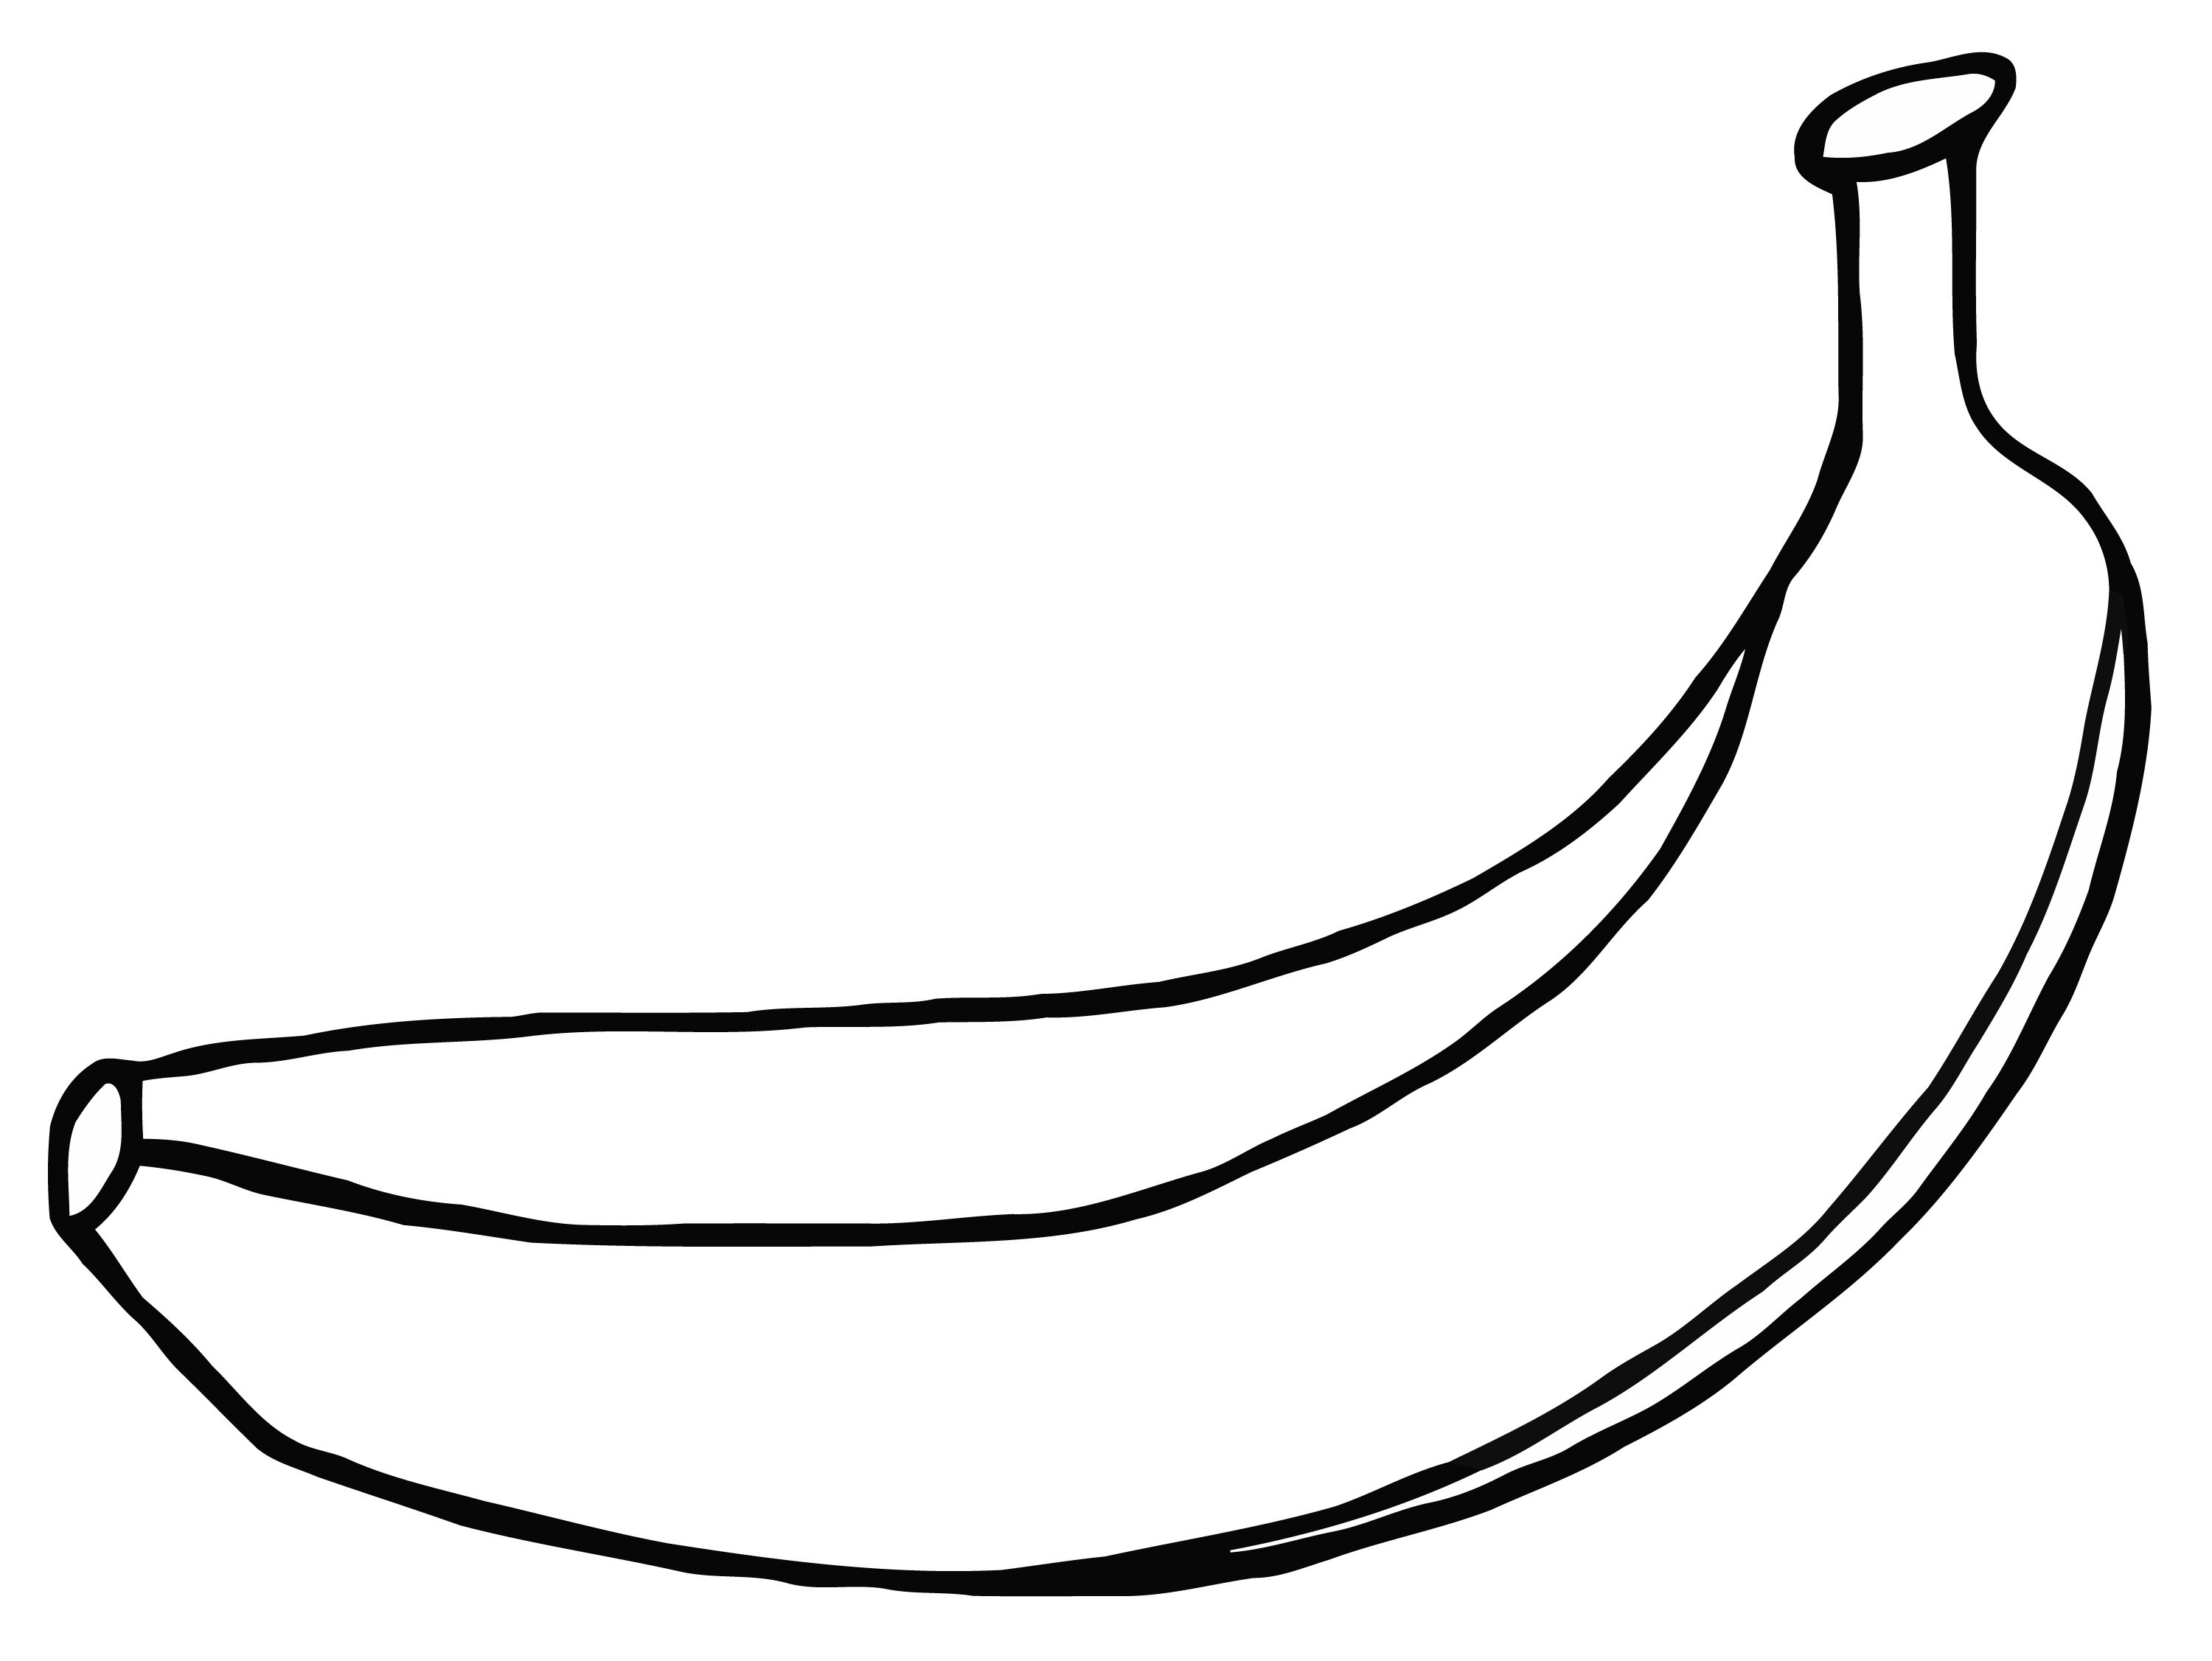 Banana Line Drawing Free Cliparts That You Can Download To You